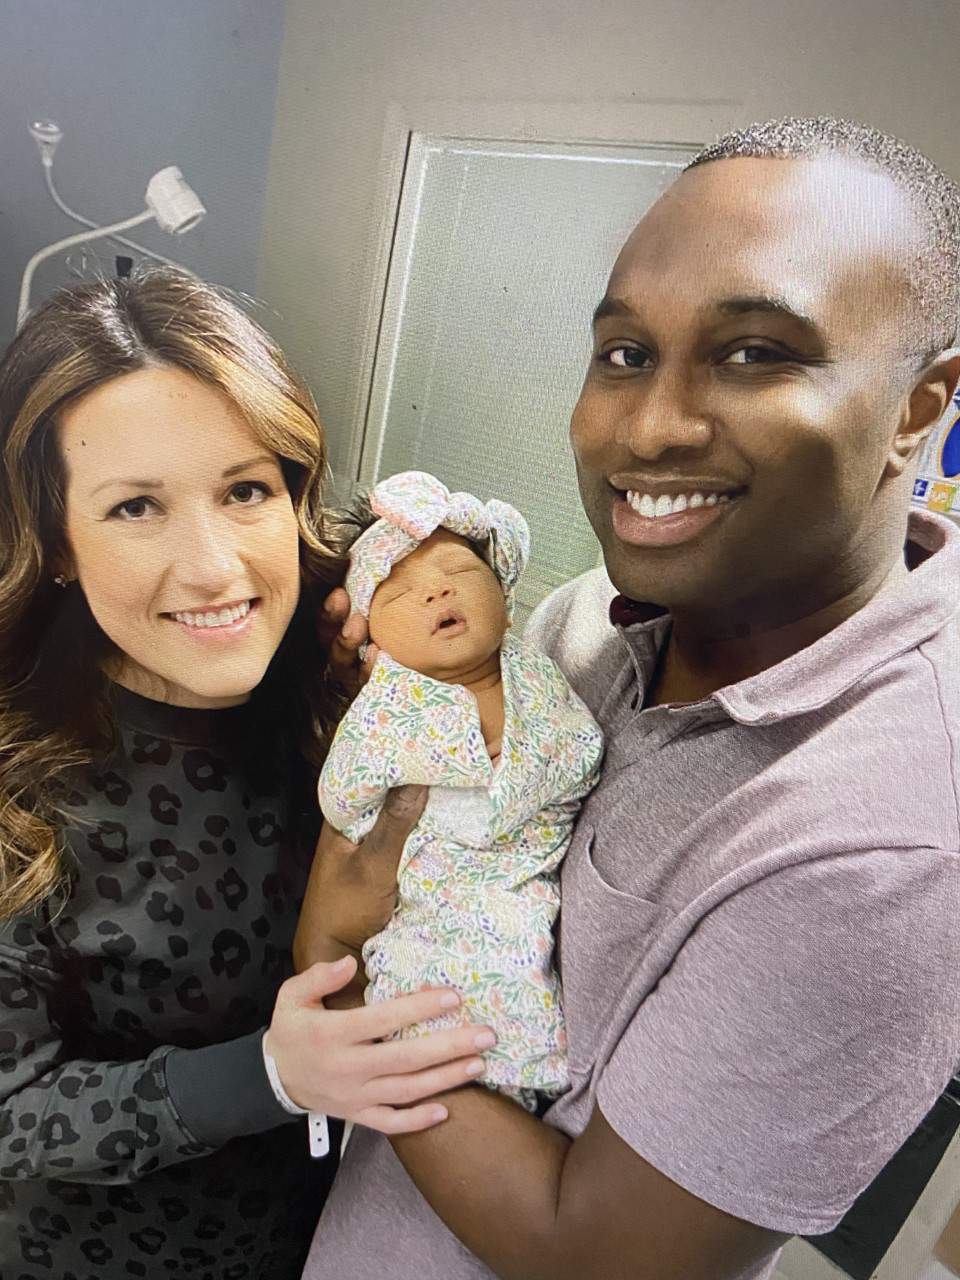 WDIV anchor Evrod Cassimy and wife welcome their third child